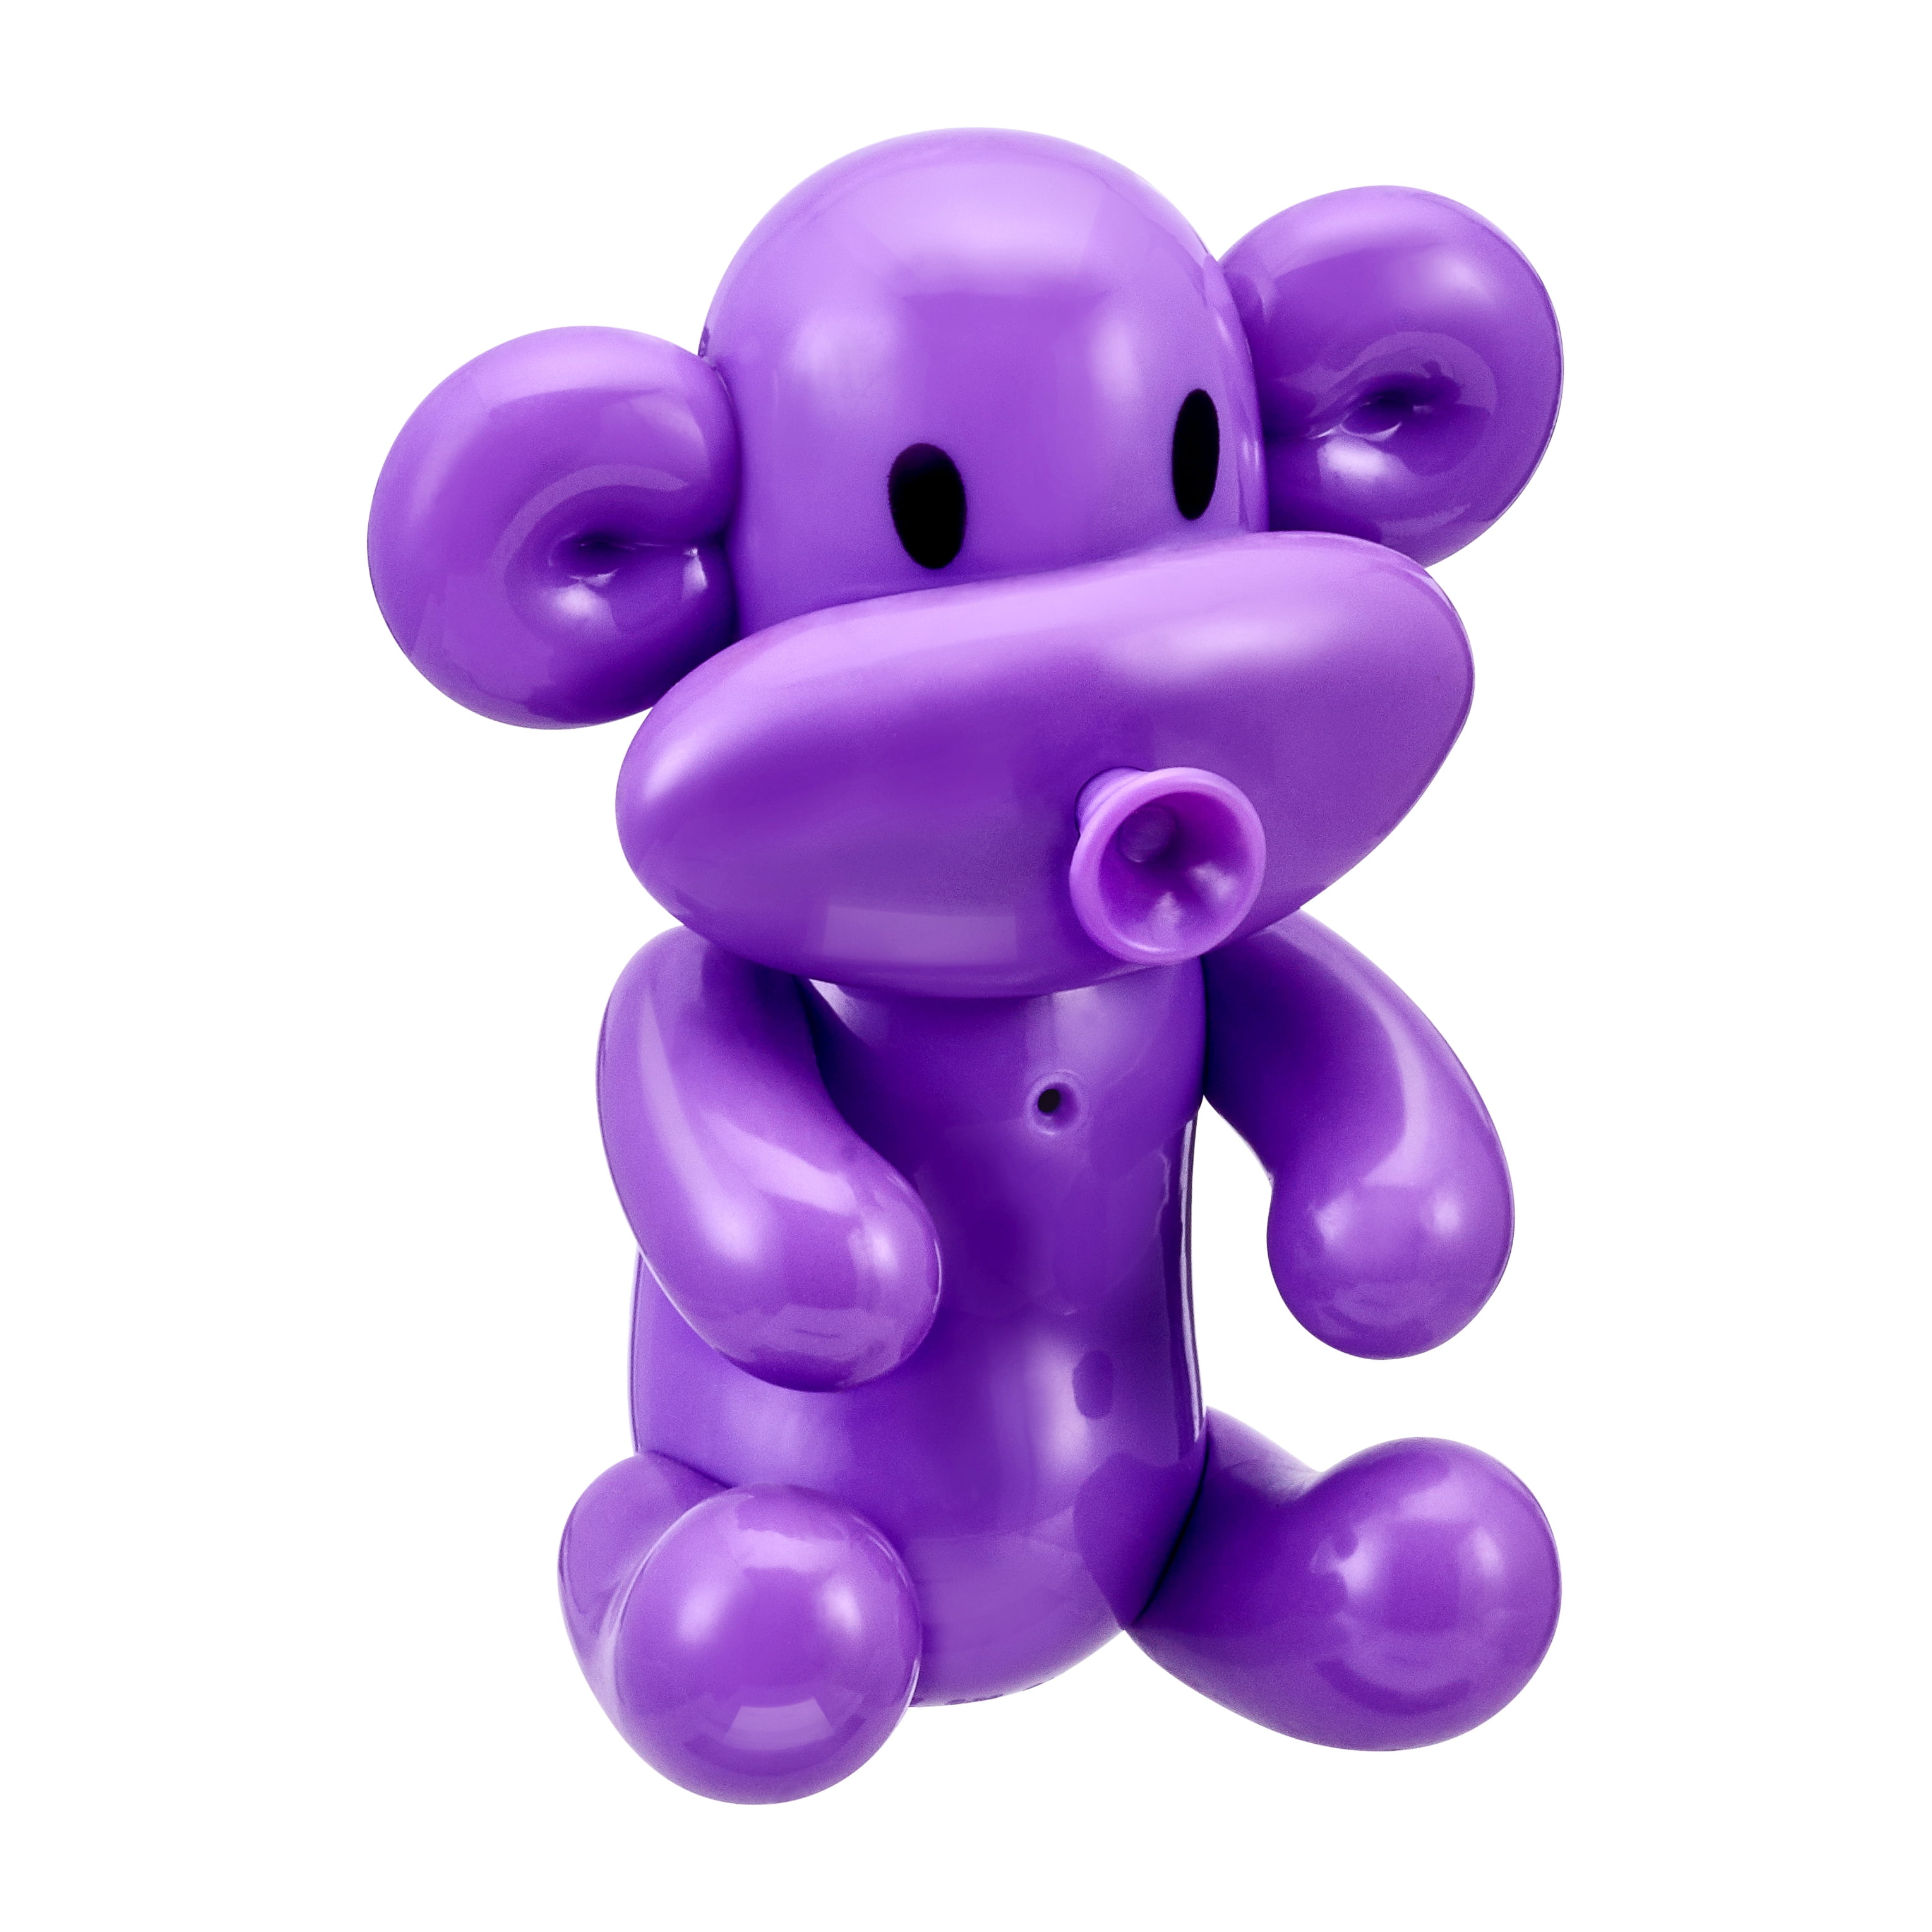 Squeakee the Balloon Dog - Makes Sound, Deflates, and Does Tricks 